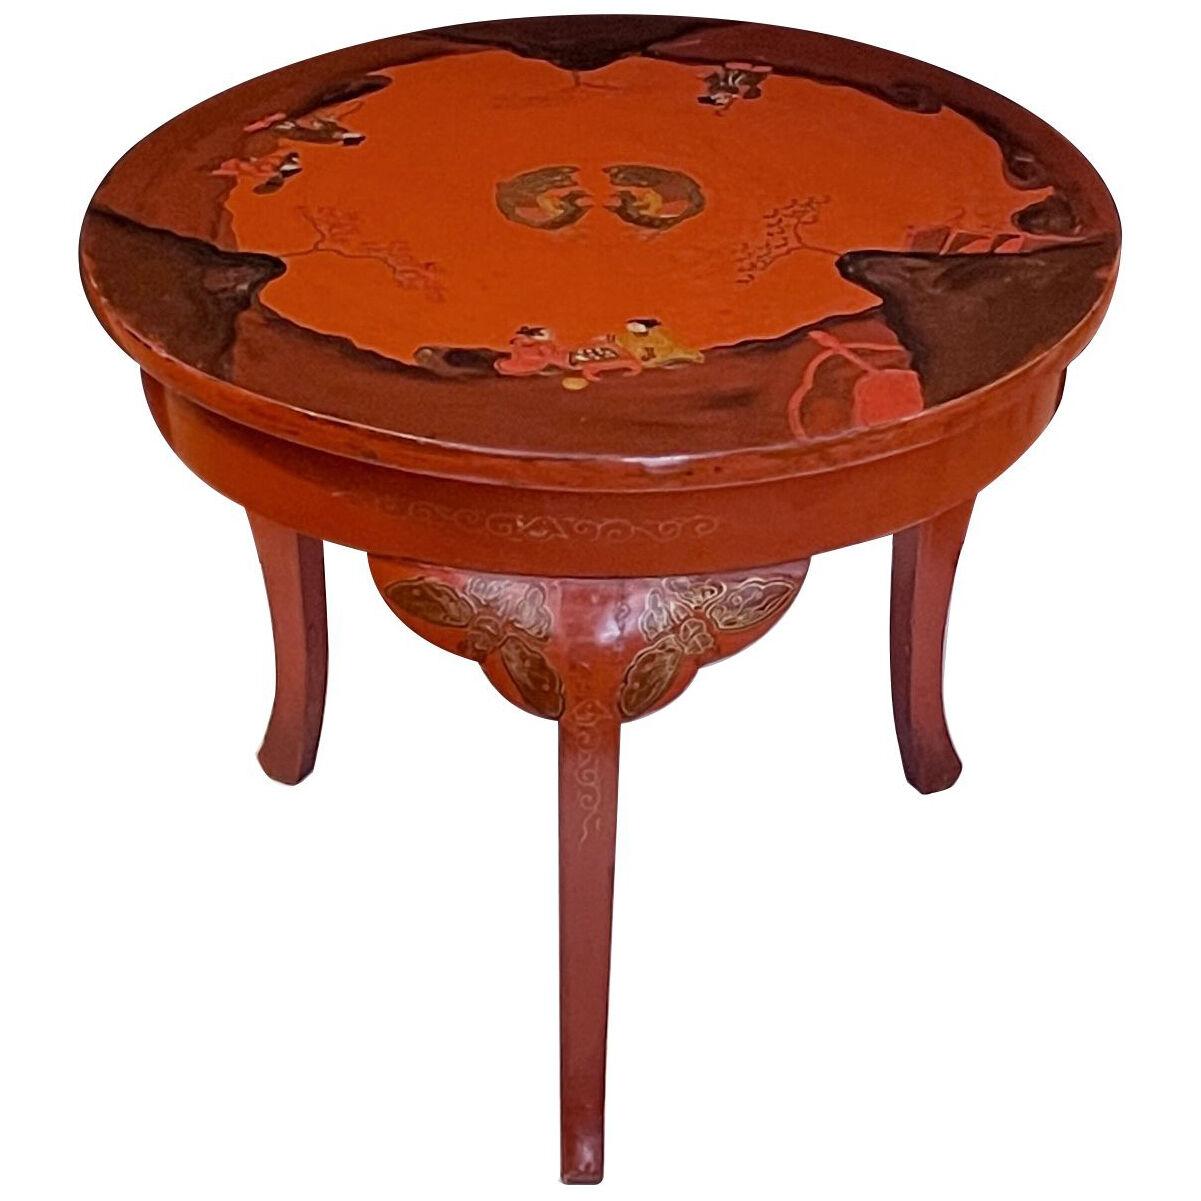 Charming Chinese red-lacquered circular tripod side/drinks table